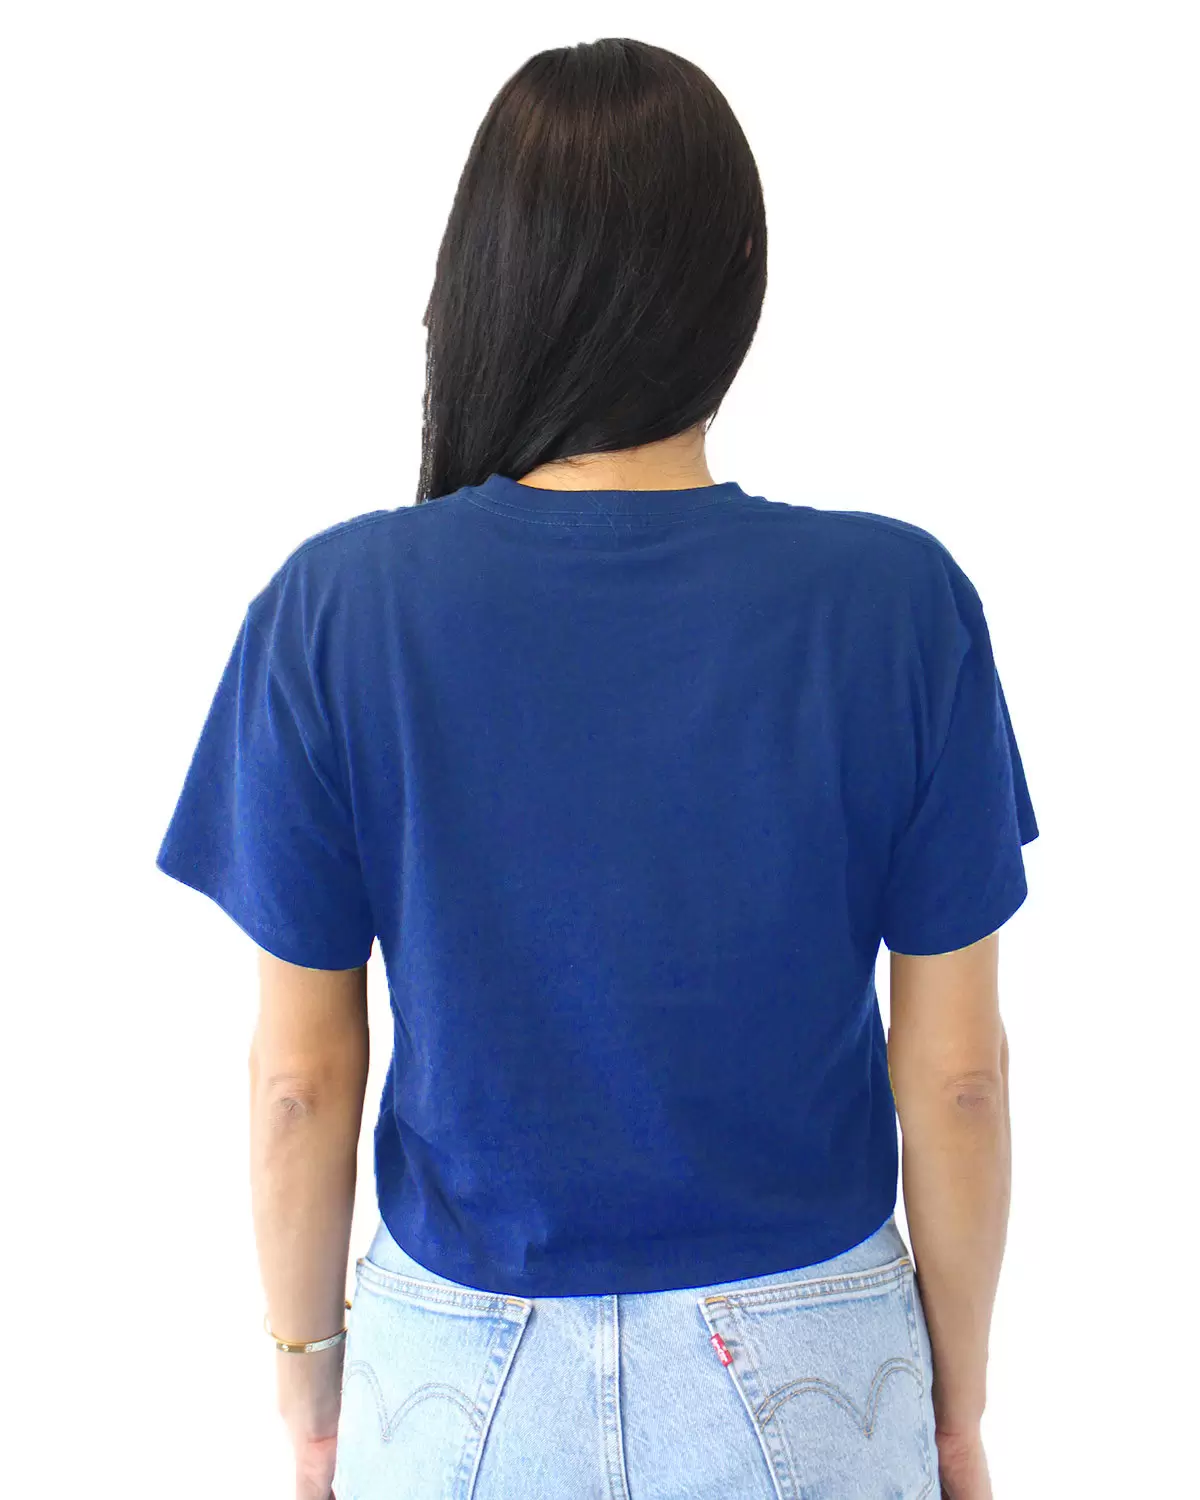 Next Level 1580 Womens Wholesale Crop Top T Shirt - From $4.53